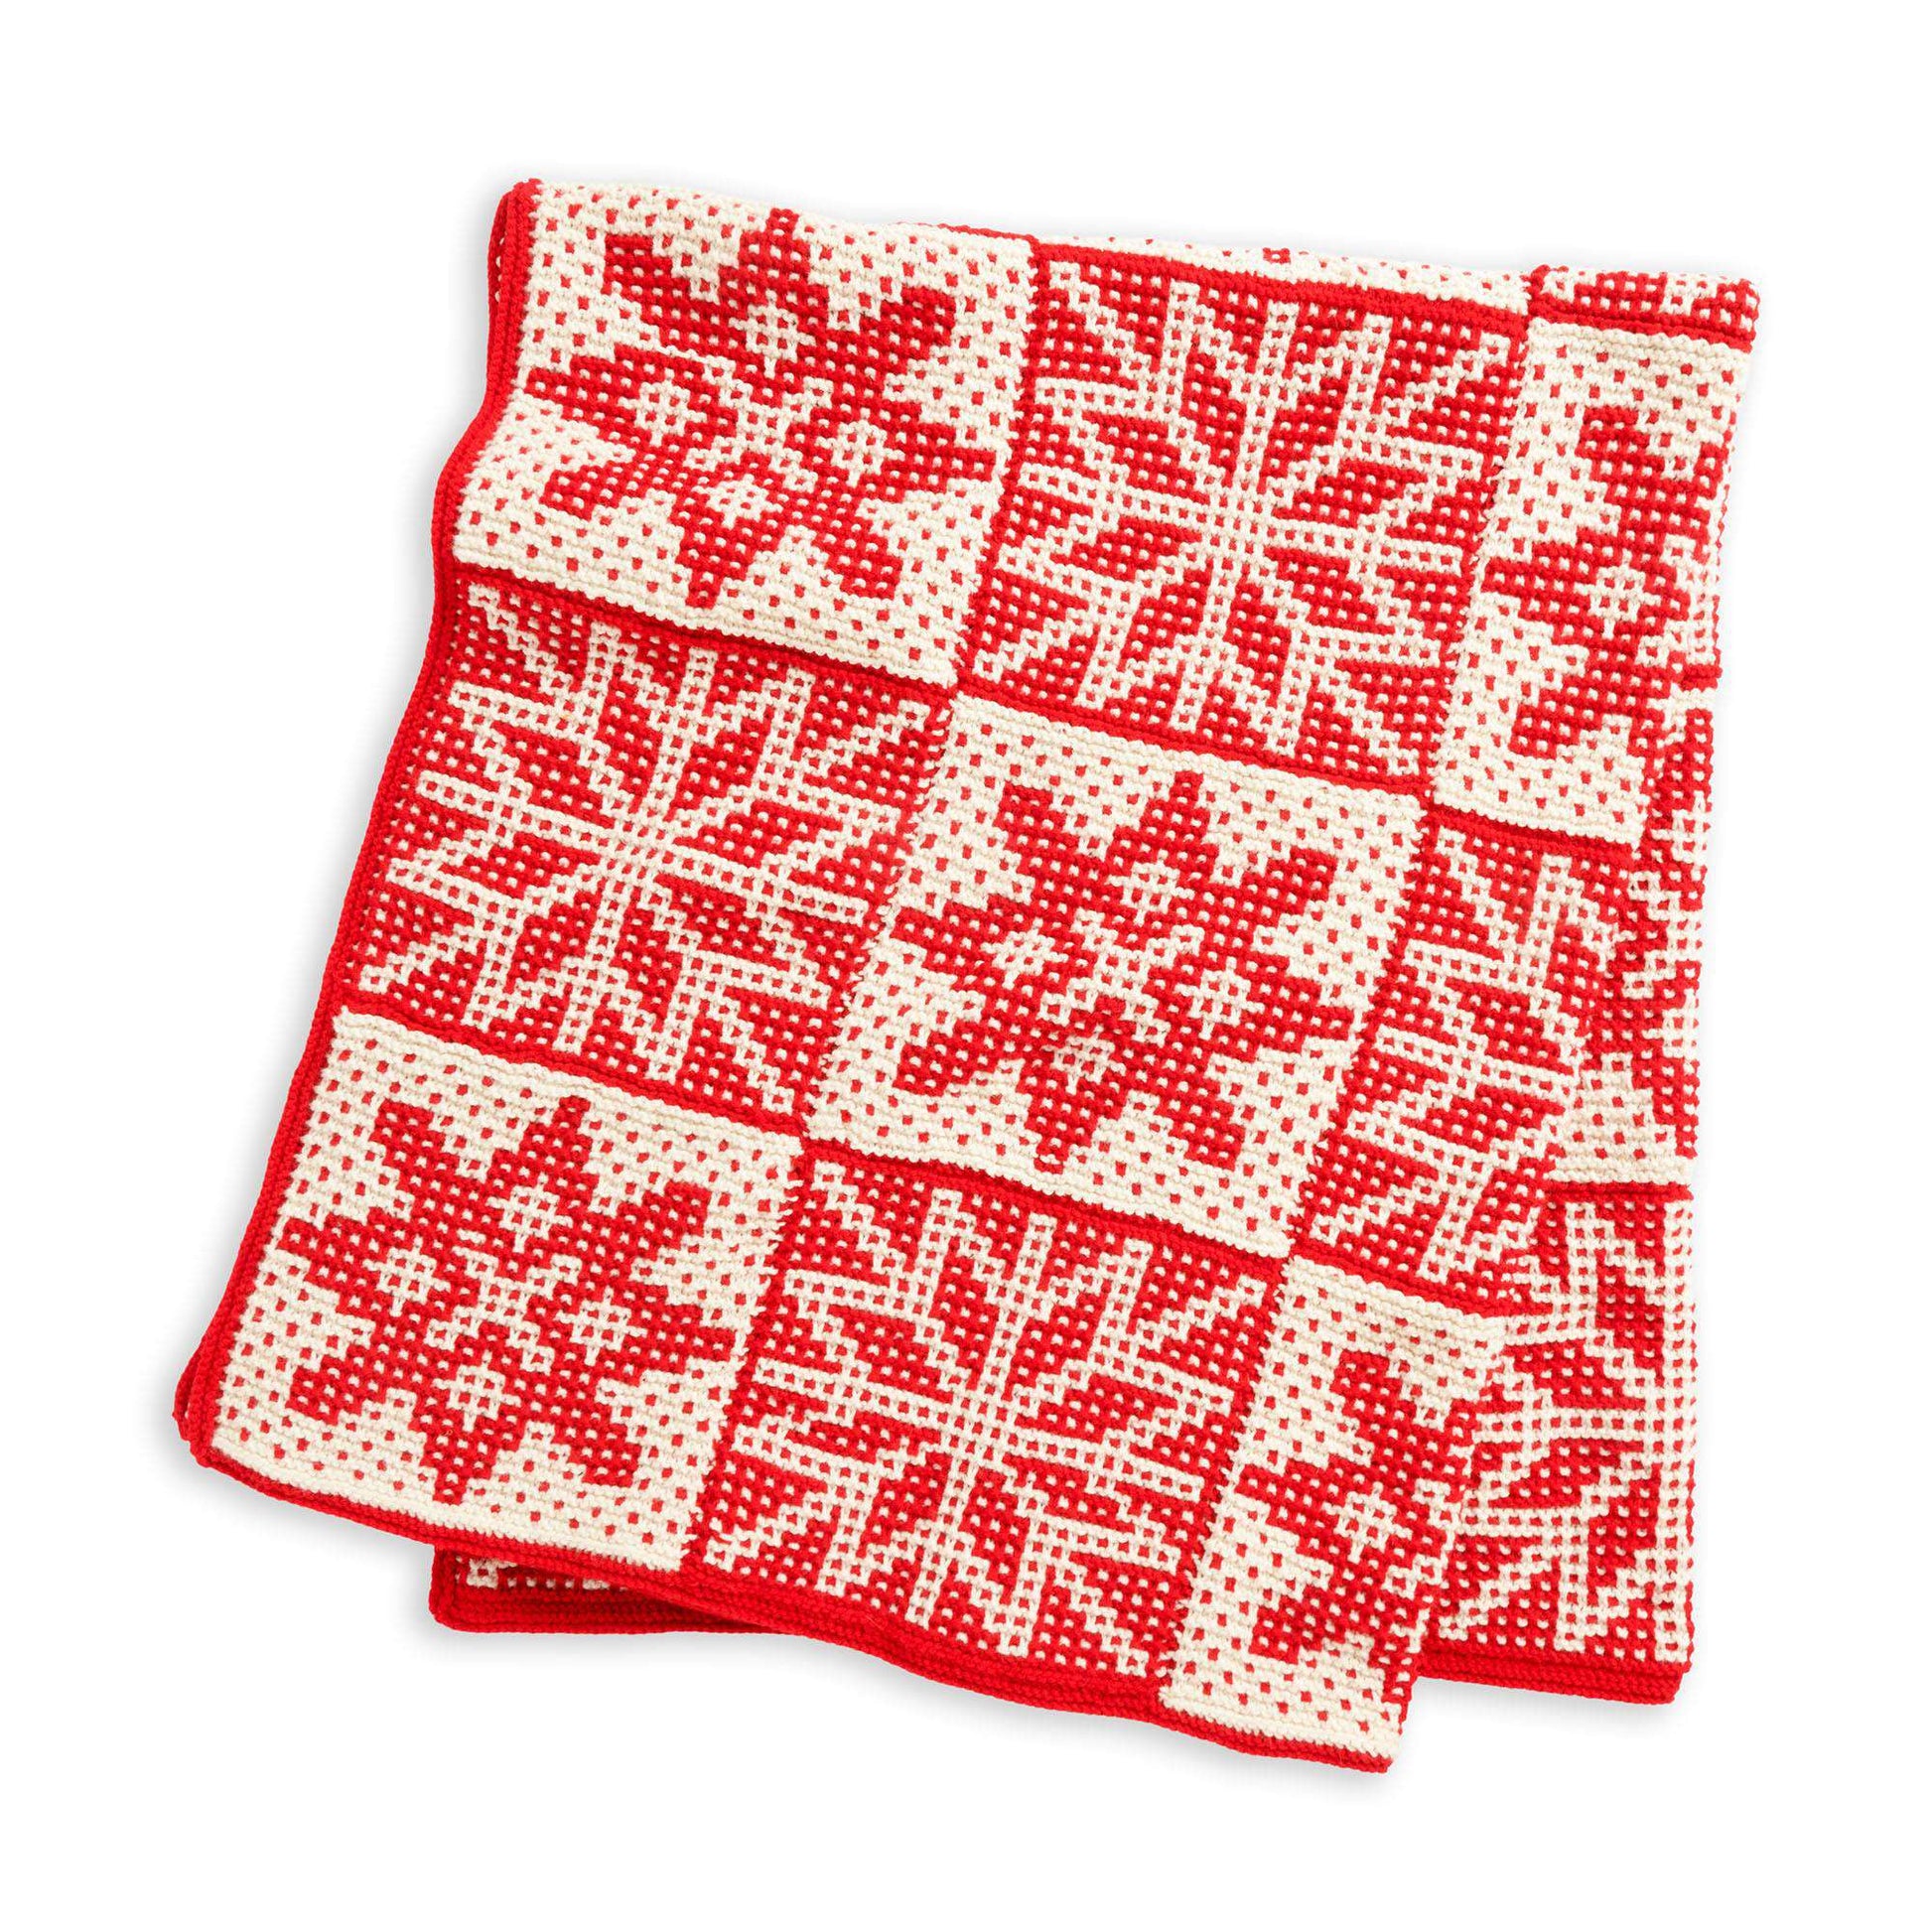 Free Red Heart Mosaic Knit Snowflakes Blanket Pattern